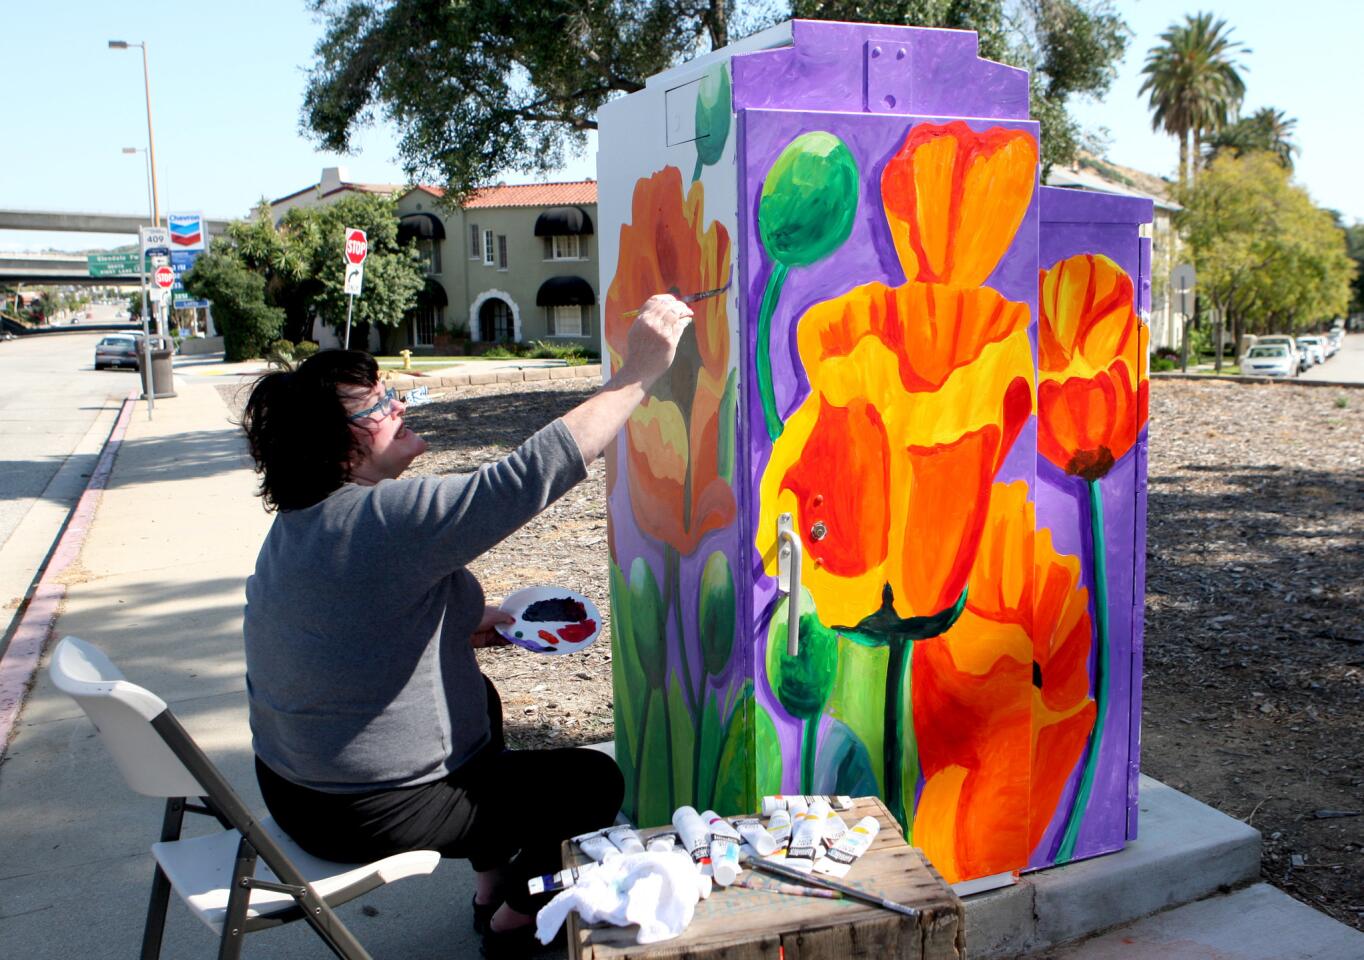 Holly Cleeland of Burbank paints poppy flowers on a utility box at Harvey Drive and Wilson Avenue in Glendale on Saturday, April 8, 2017.